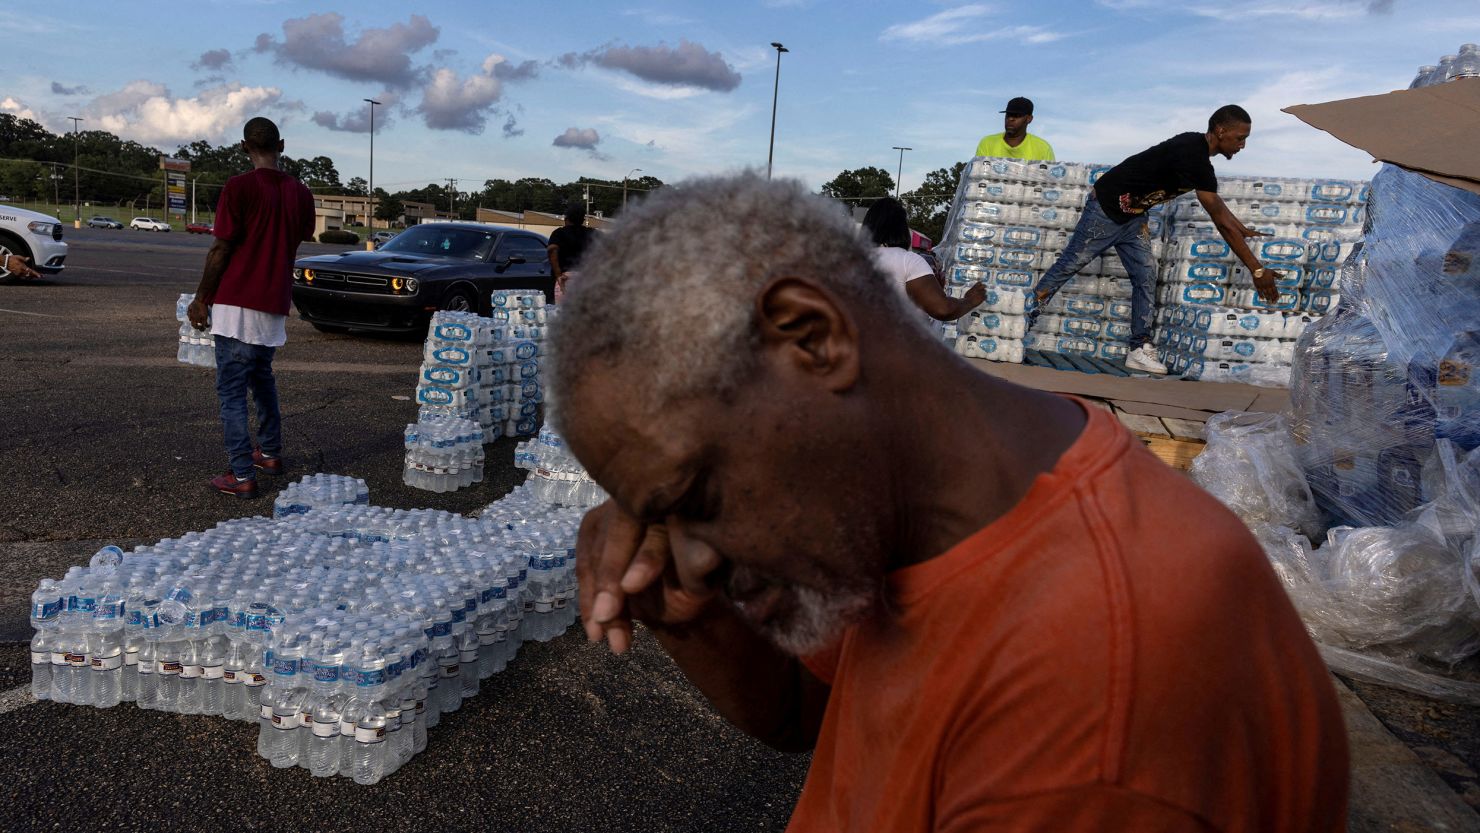 Phillip Young, a resident from Jackson, Mississippi, takes a break while helping volunteers distribute bottles of water during the city's water infrastructure crisis on August 31, 2022. 